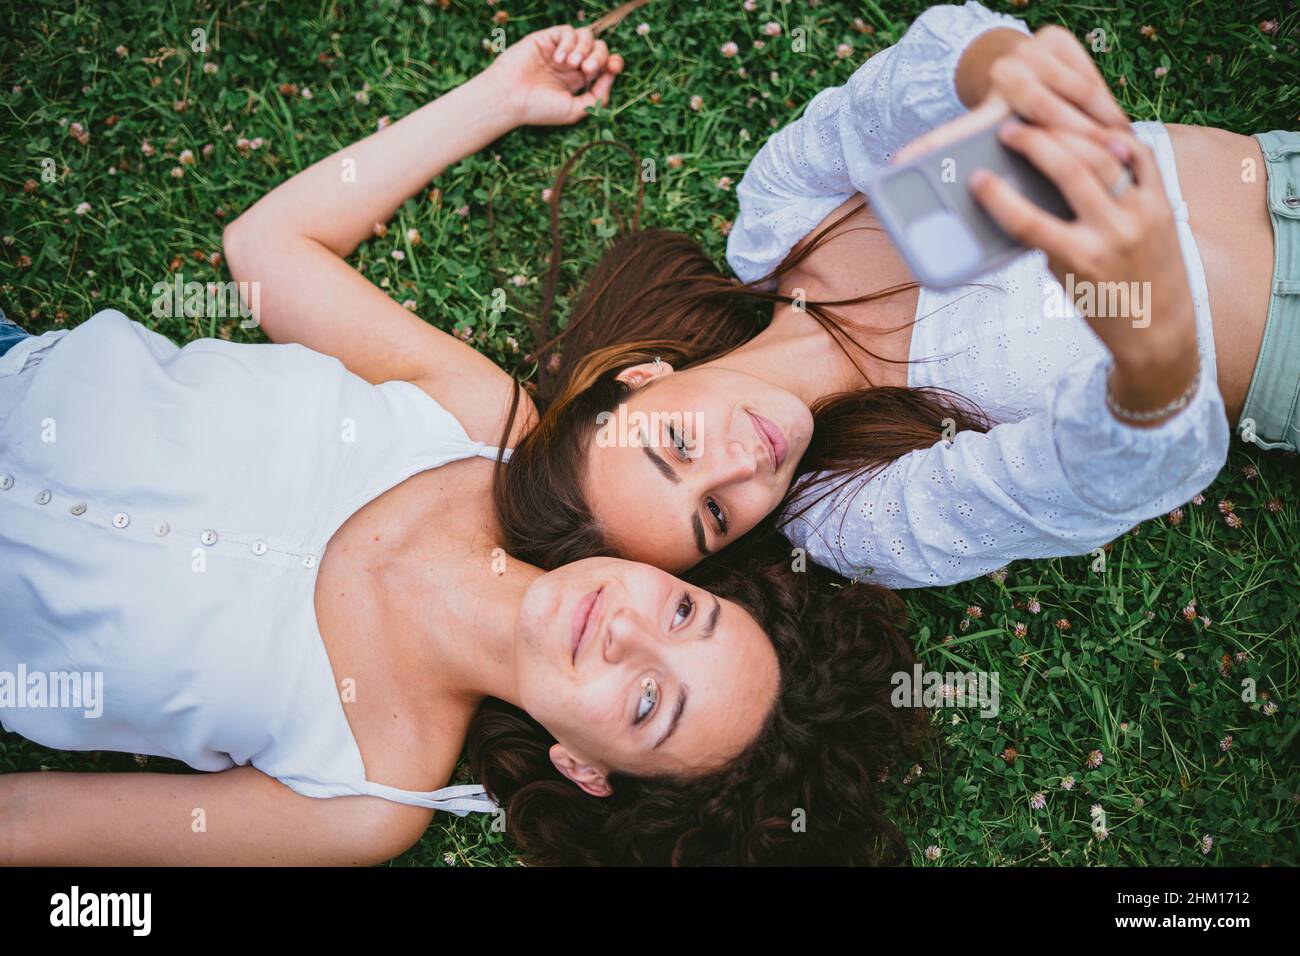 Two friends taking a selfie photo while they are laying down on the grass in a park. Stock Photo